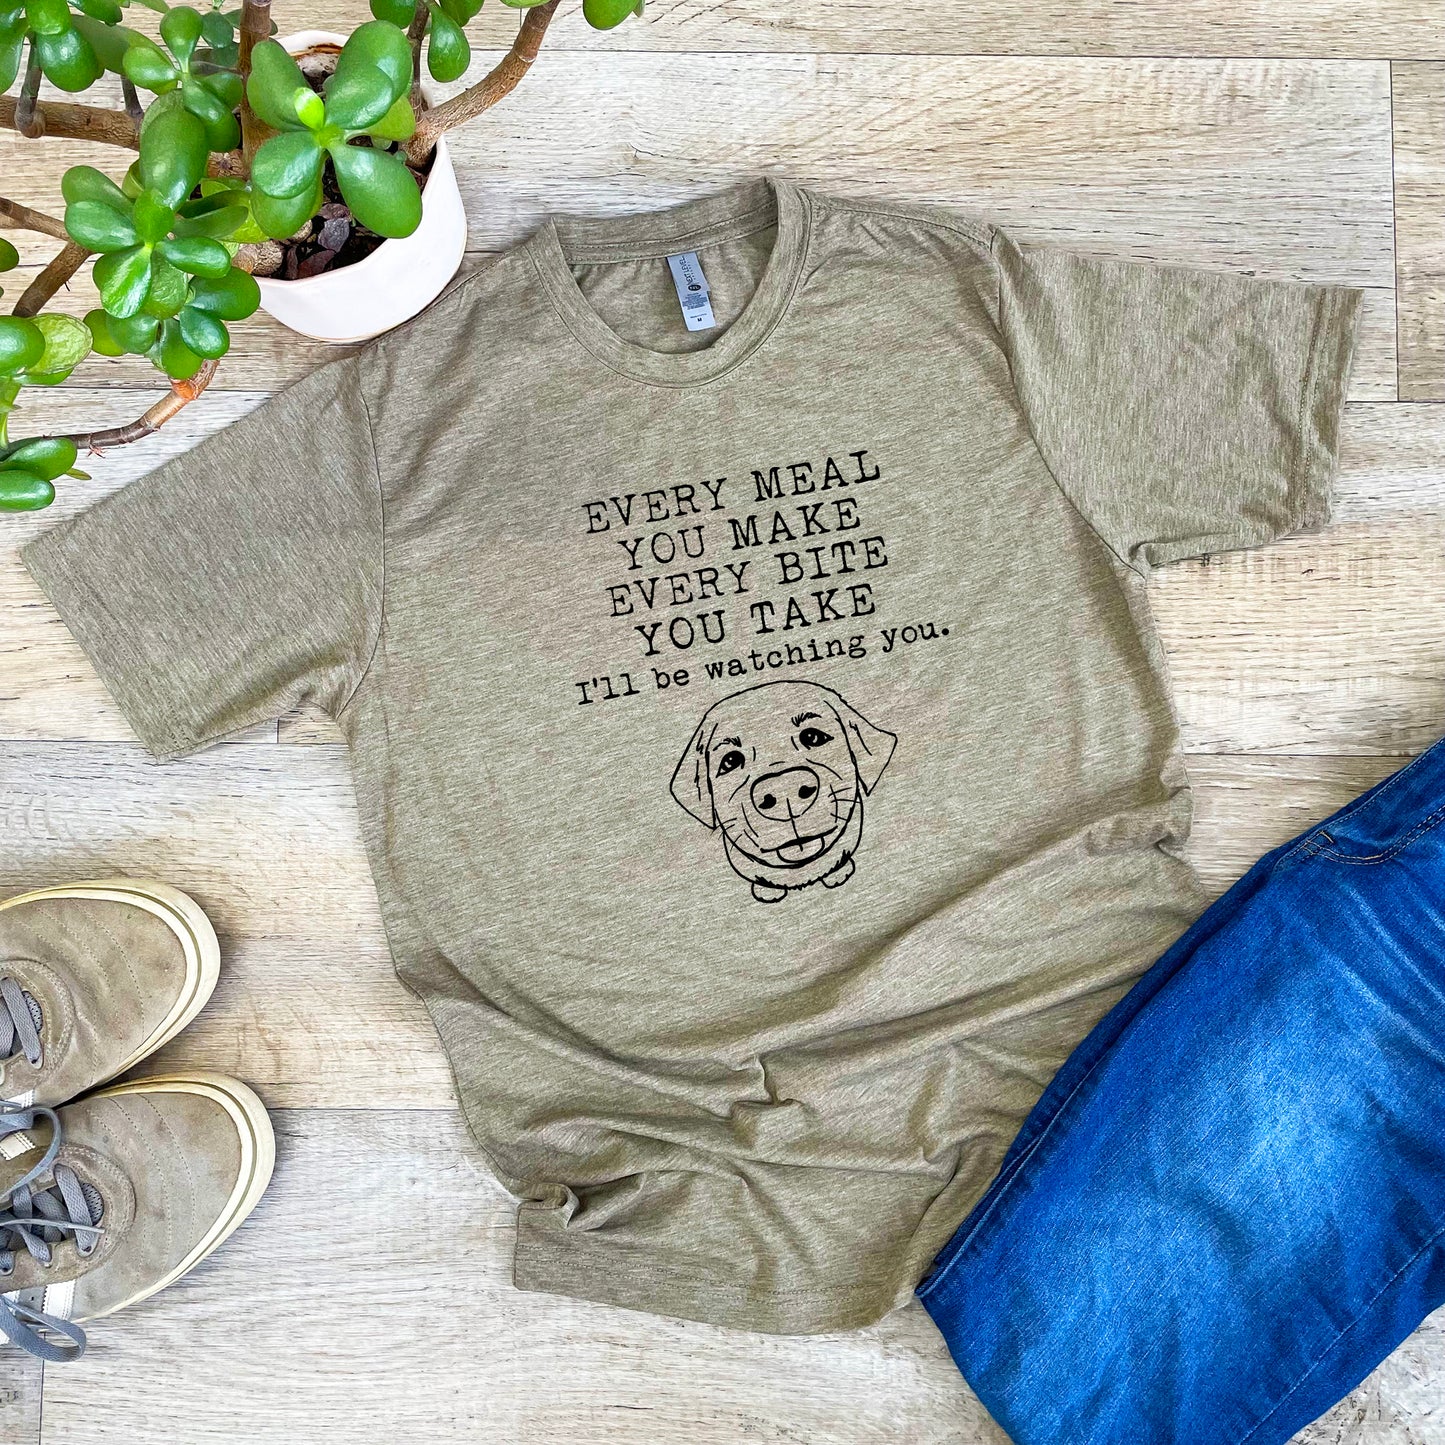 Every Meal You Make, Every Bite You Take, I'll Be Watching You - Men's / Unisex Tee - Sage or Stonewash Blue